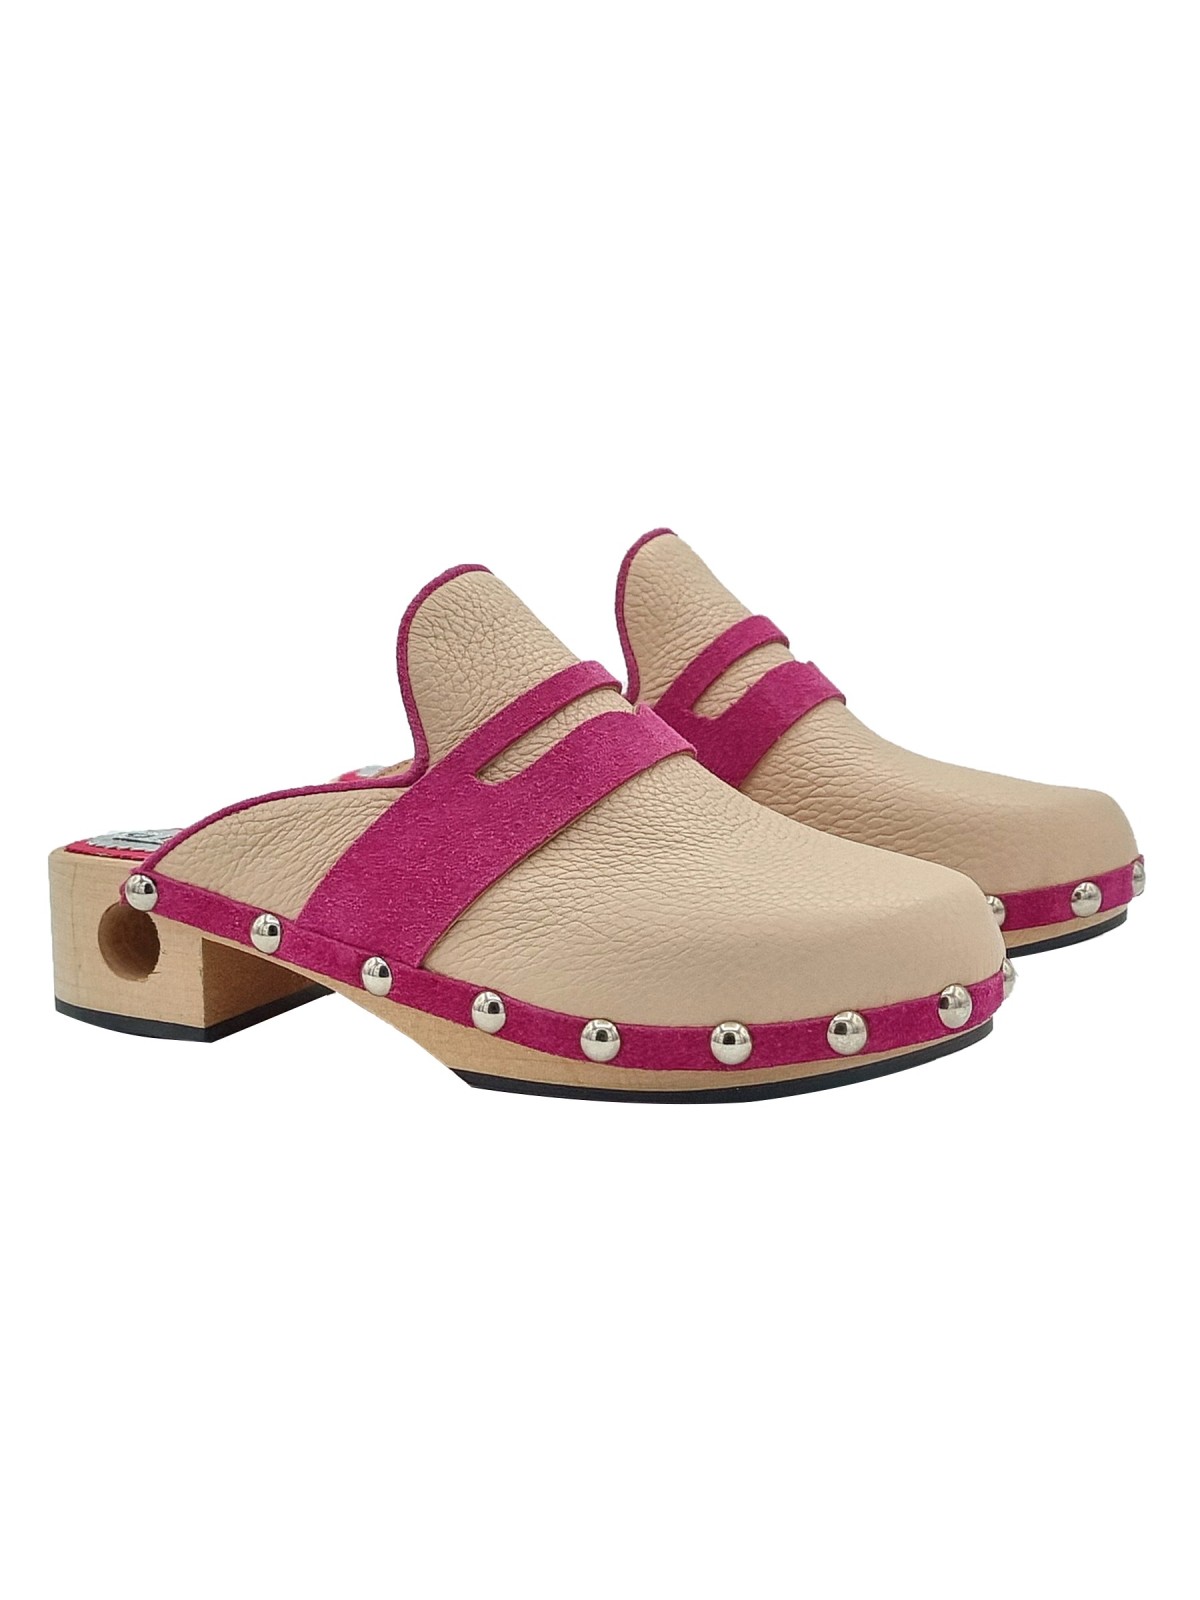 LOW TWO-COLORED CLOGS